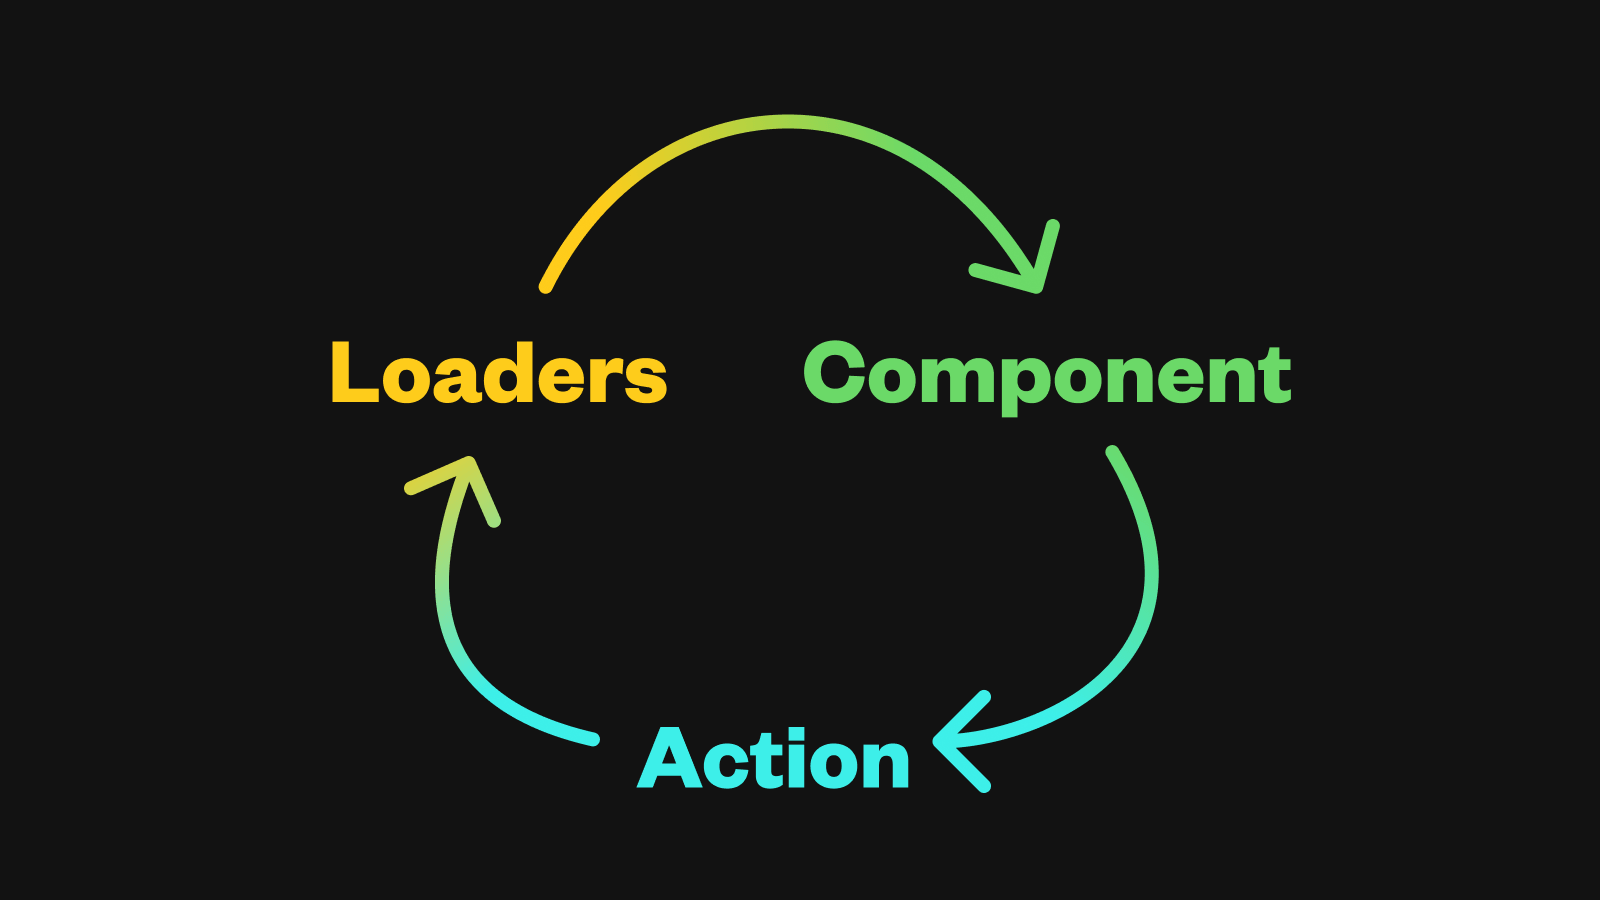 A graphic with the words “Loaders” -> “Component” -> “Action” connected by arrows and depicted cyclically.